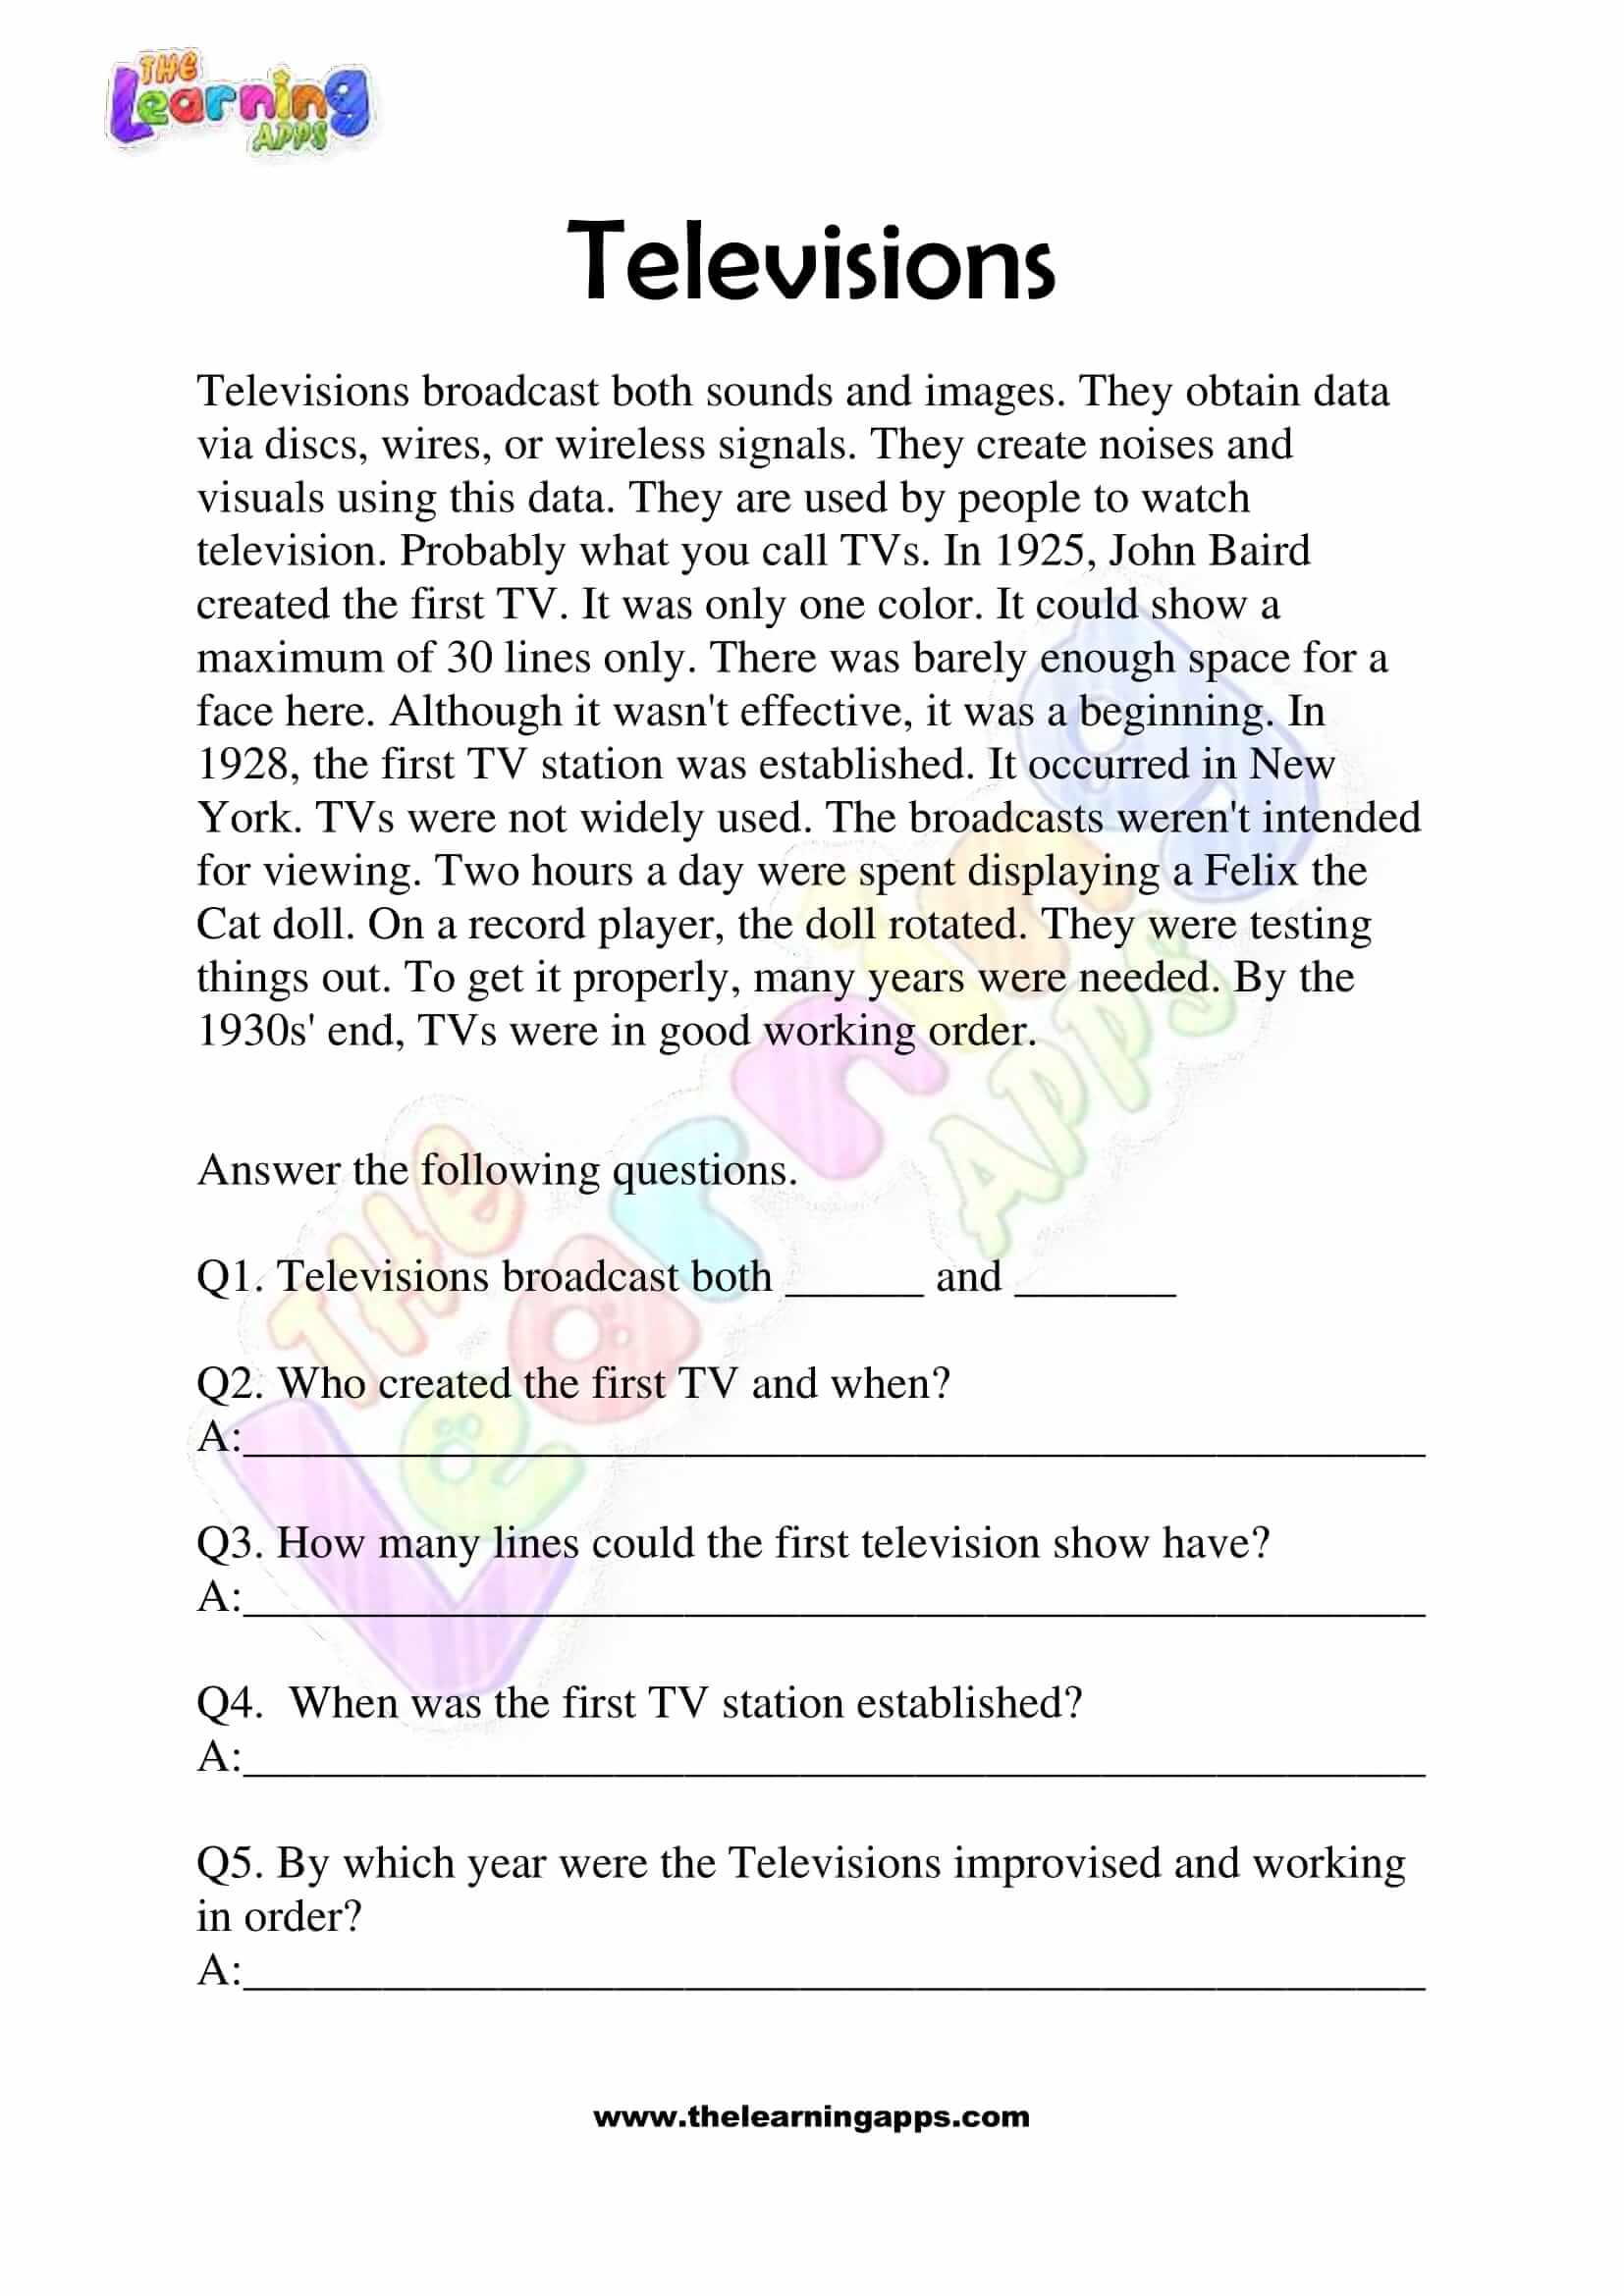 Non Fiction Reading Passages - Grade 2 - Televisions